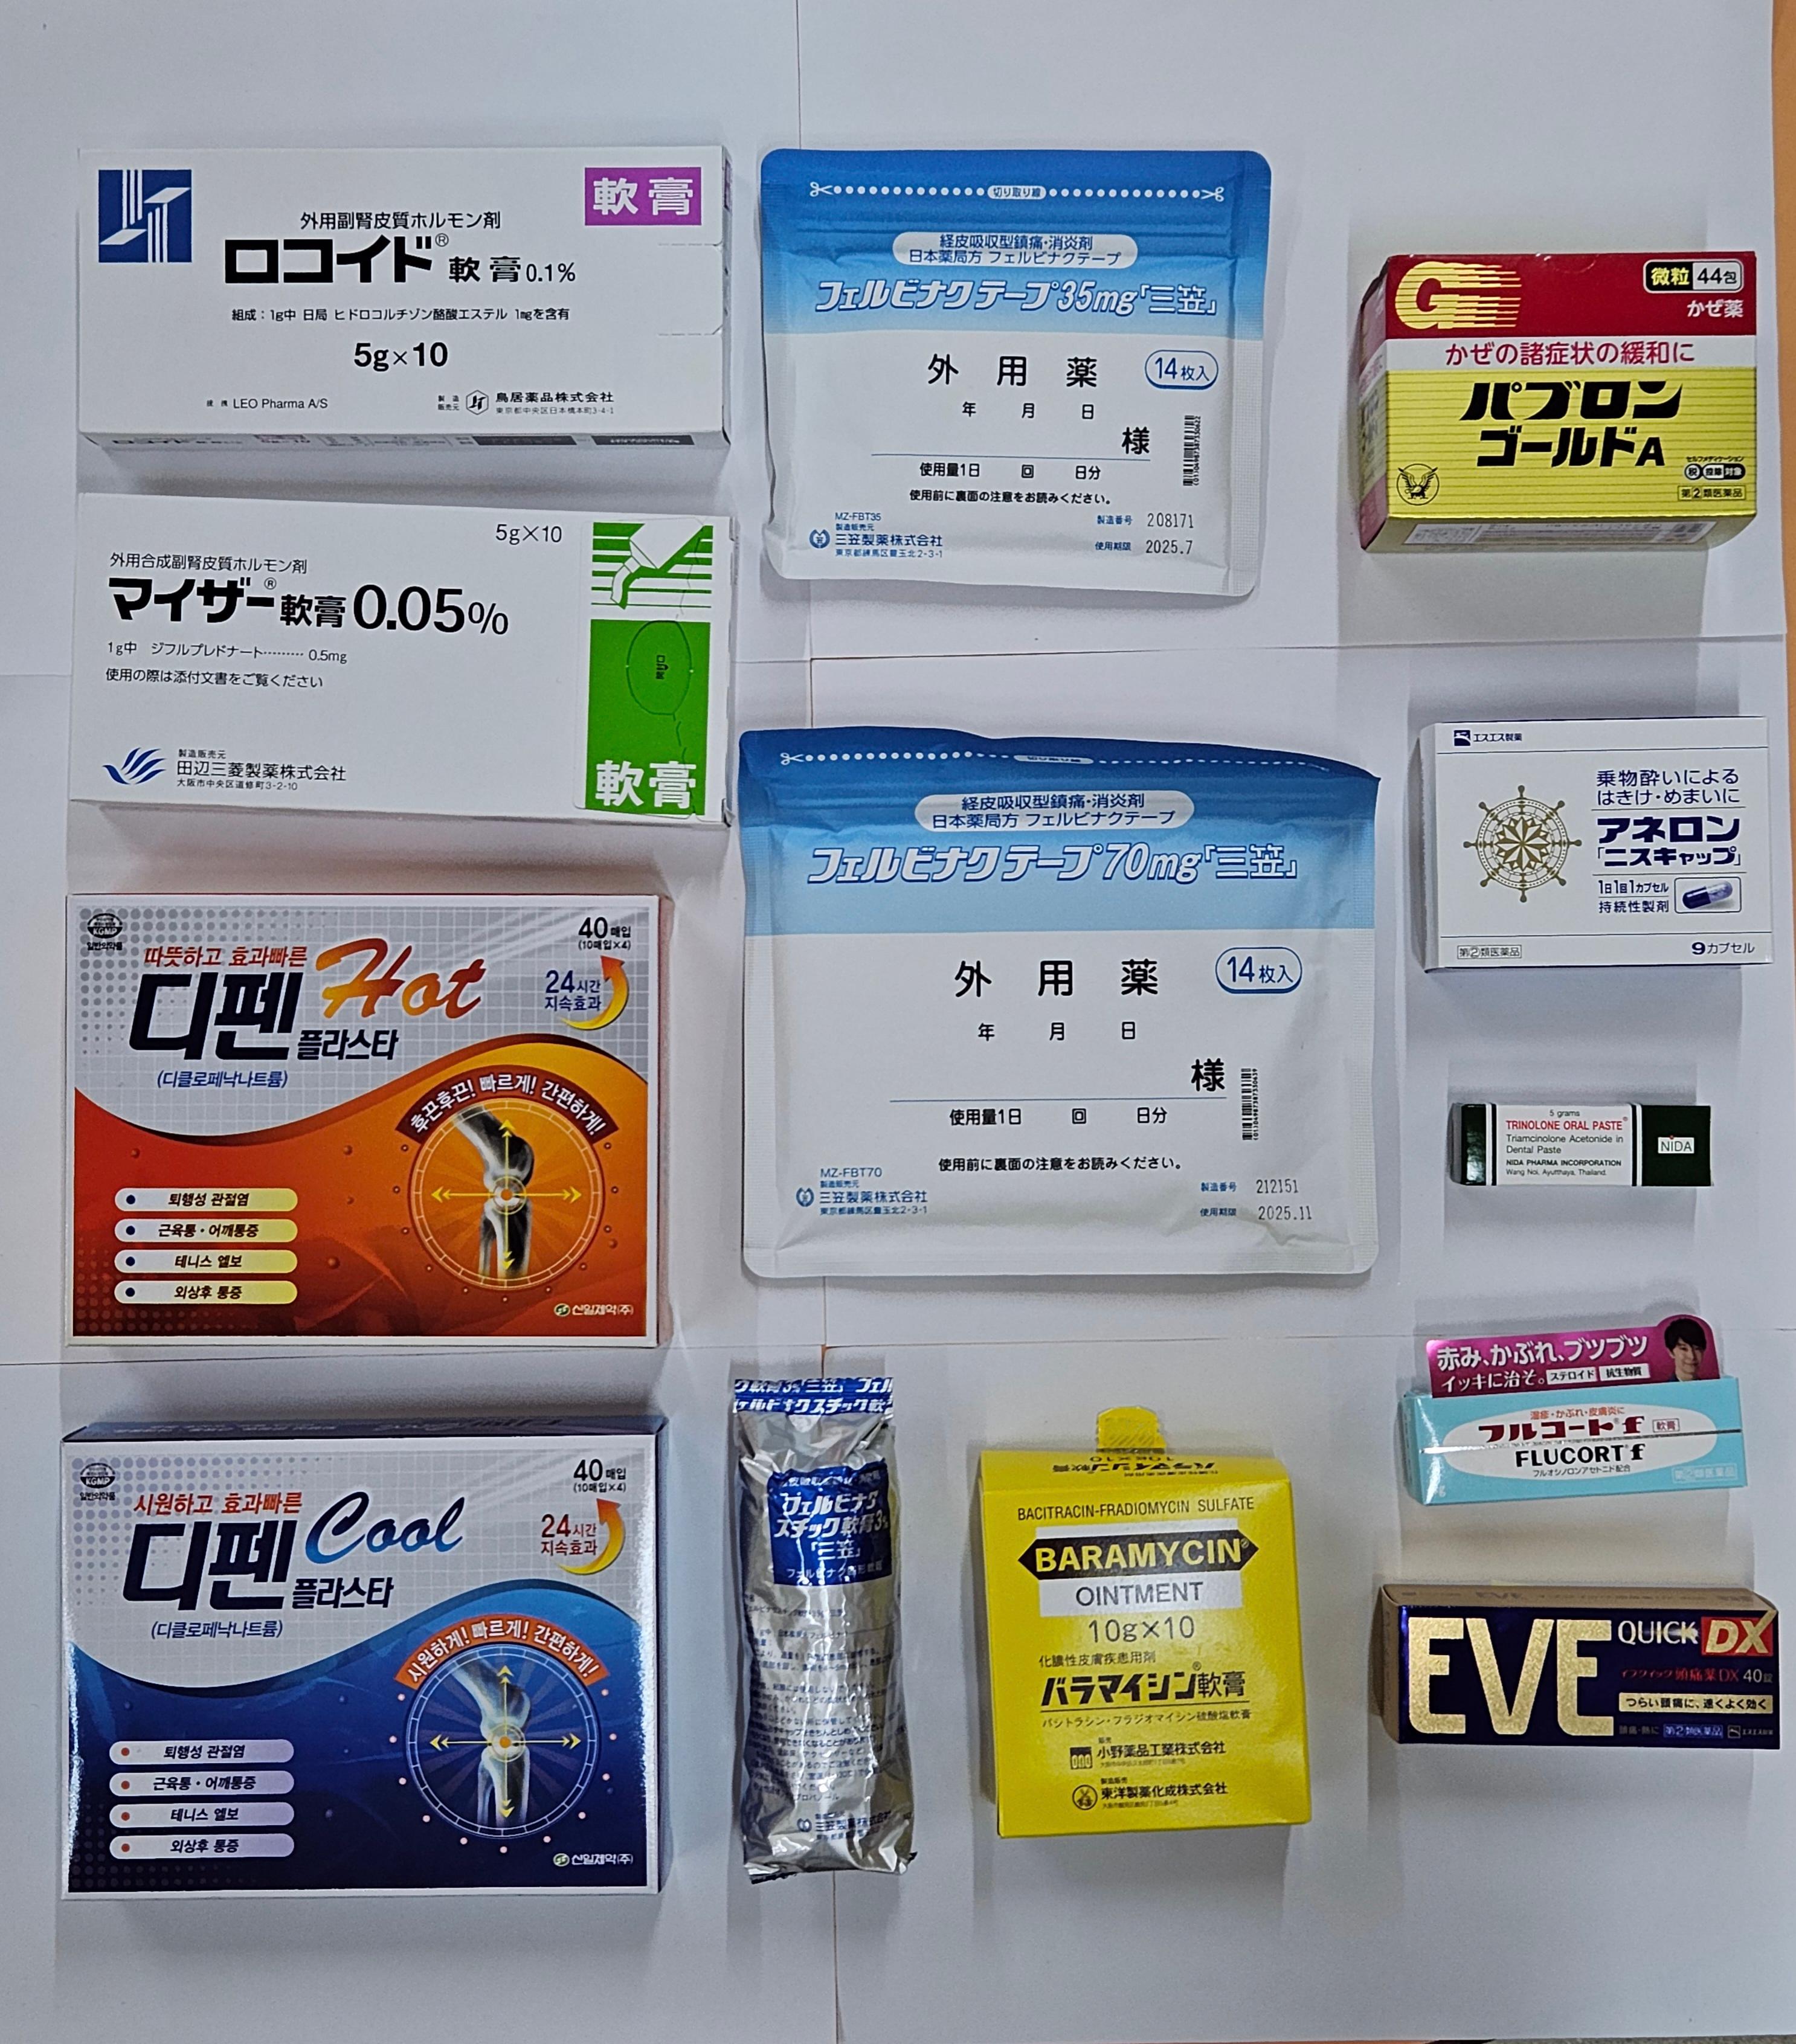 The Department of Health today (June 21) conducted an operation against the suspected illegal sale and possession of unregistered pharmaceutical products, Part 1 poisons and antibiotics. Photo shows the 13 types of relevant medicines seized during the operation, including pain killers, cough and cold medicines, anti-dizziness and antiemetic drugs, as well as external preparations.